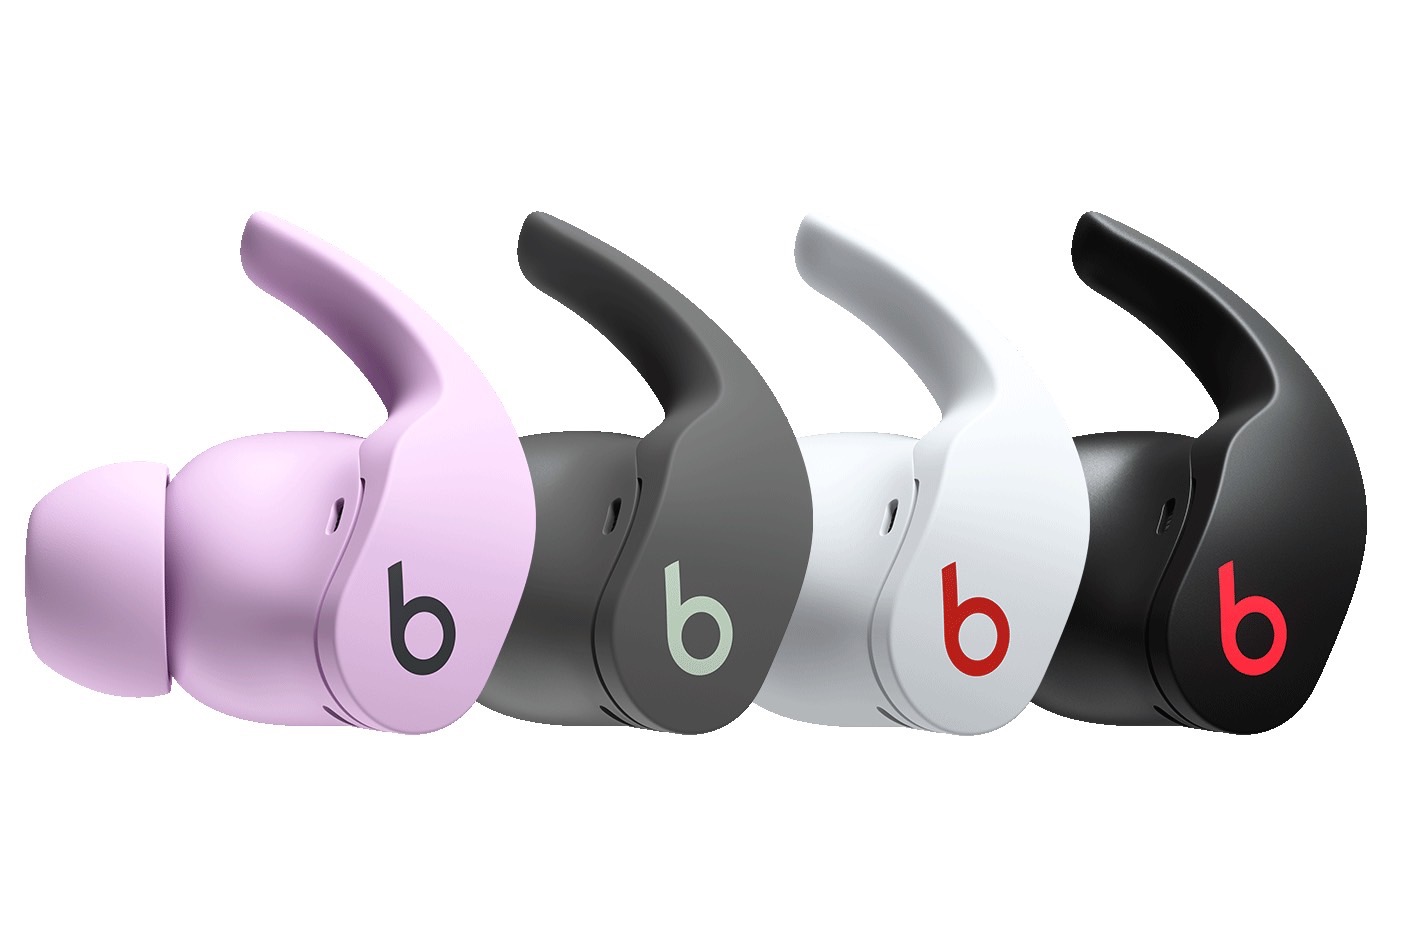 Beats Fit Pro in multiple colors.